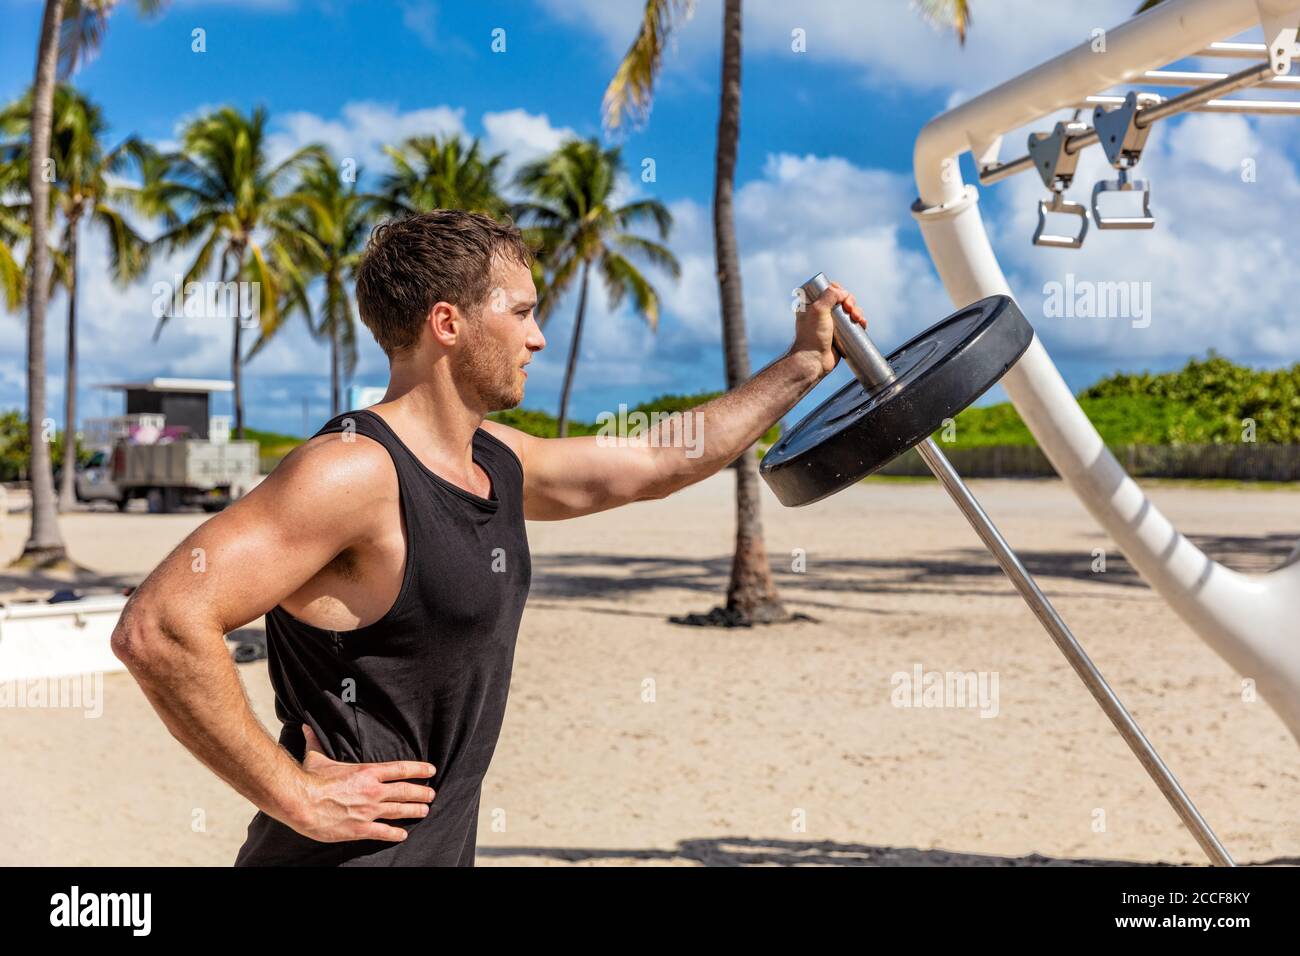 Outdoor Gym - Fitness man working out biceps muscles at outdoor public calisthenic gym on South Beach doing T-bar barbell extensions training on South Stock Photo